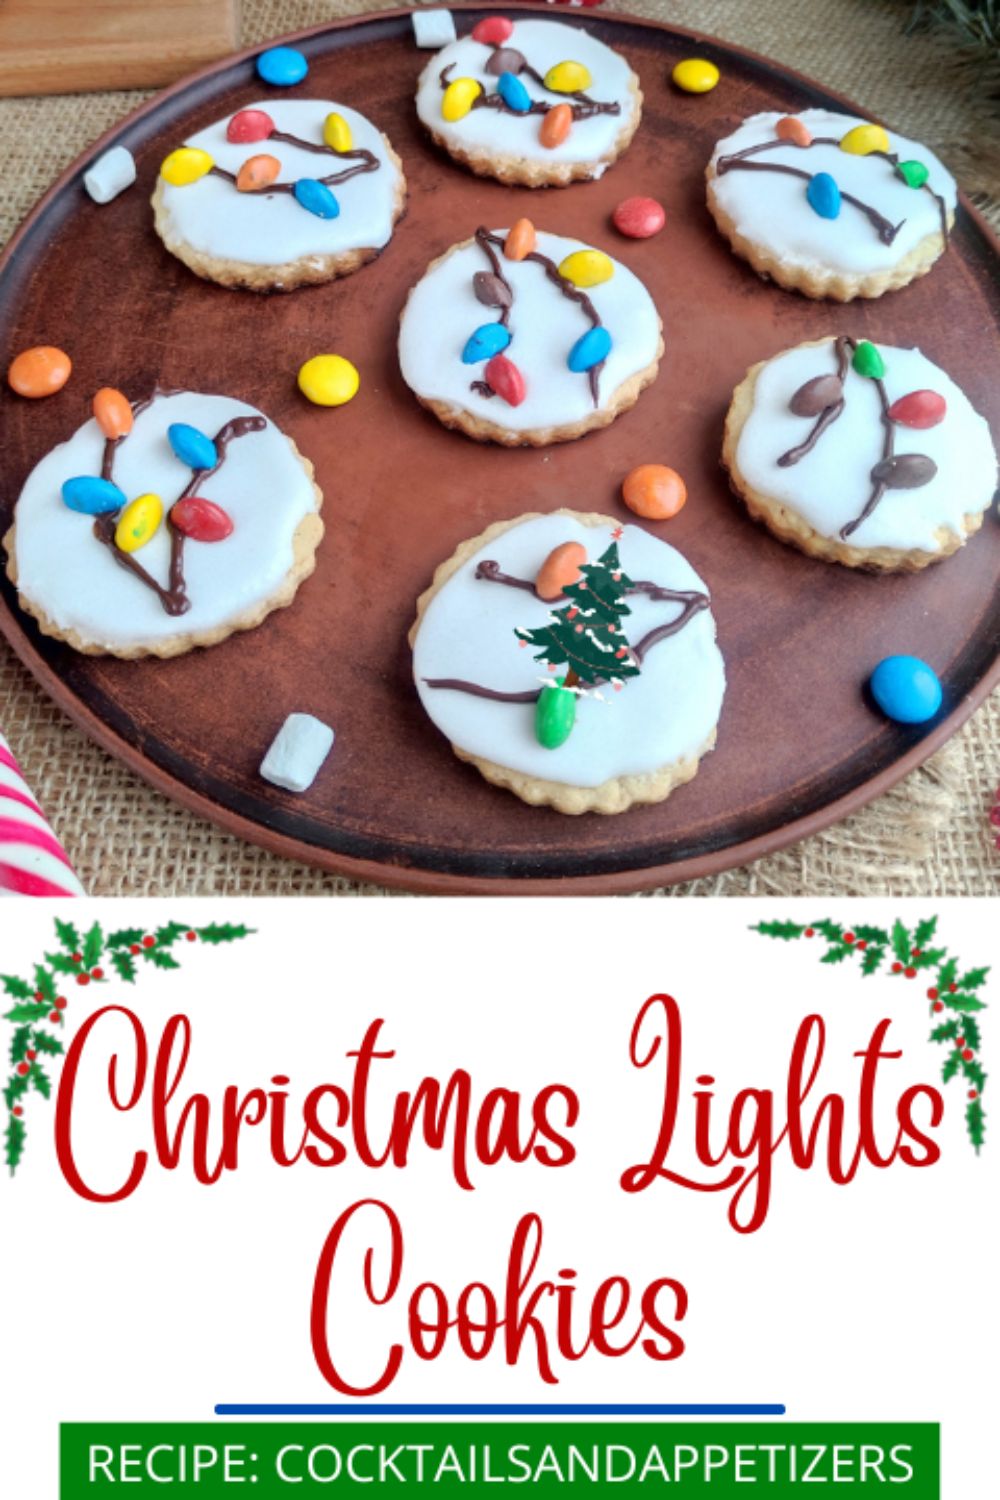 Christmas Lights cookies on a brown serving plate.